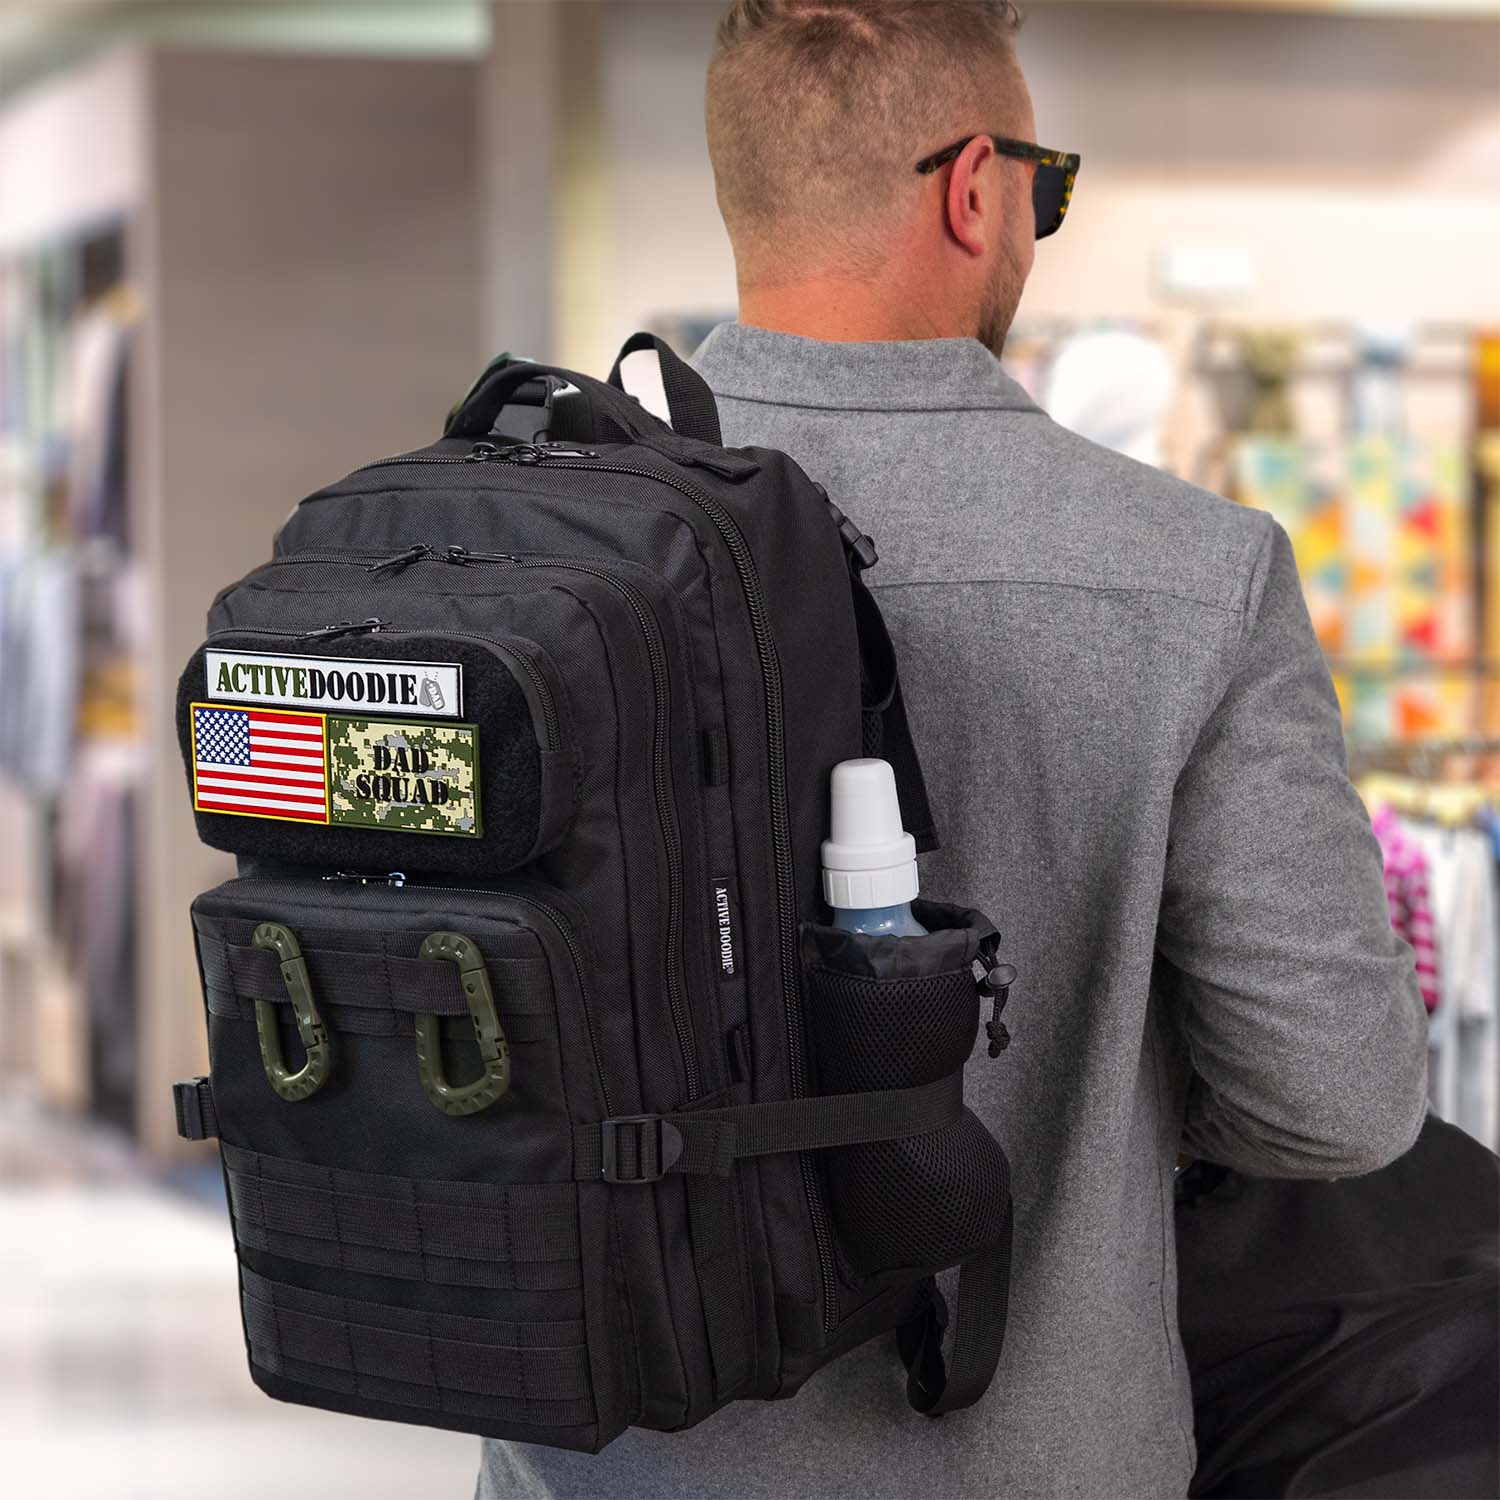 Active Doodie® JUG.30L Dad Diaper Bag Backpack with Green D-Rings and Dad Squad Patches - Black